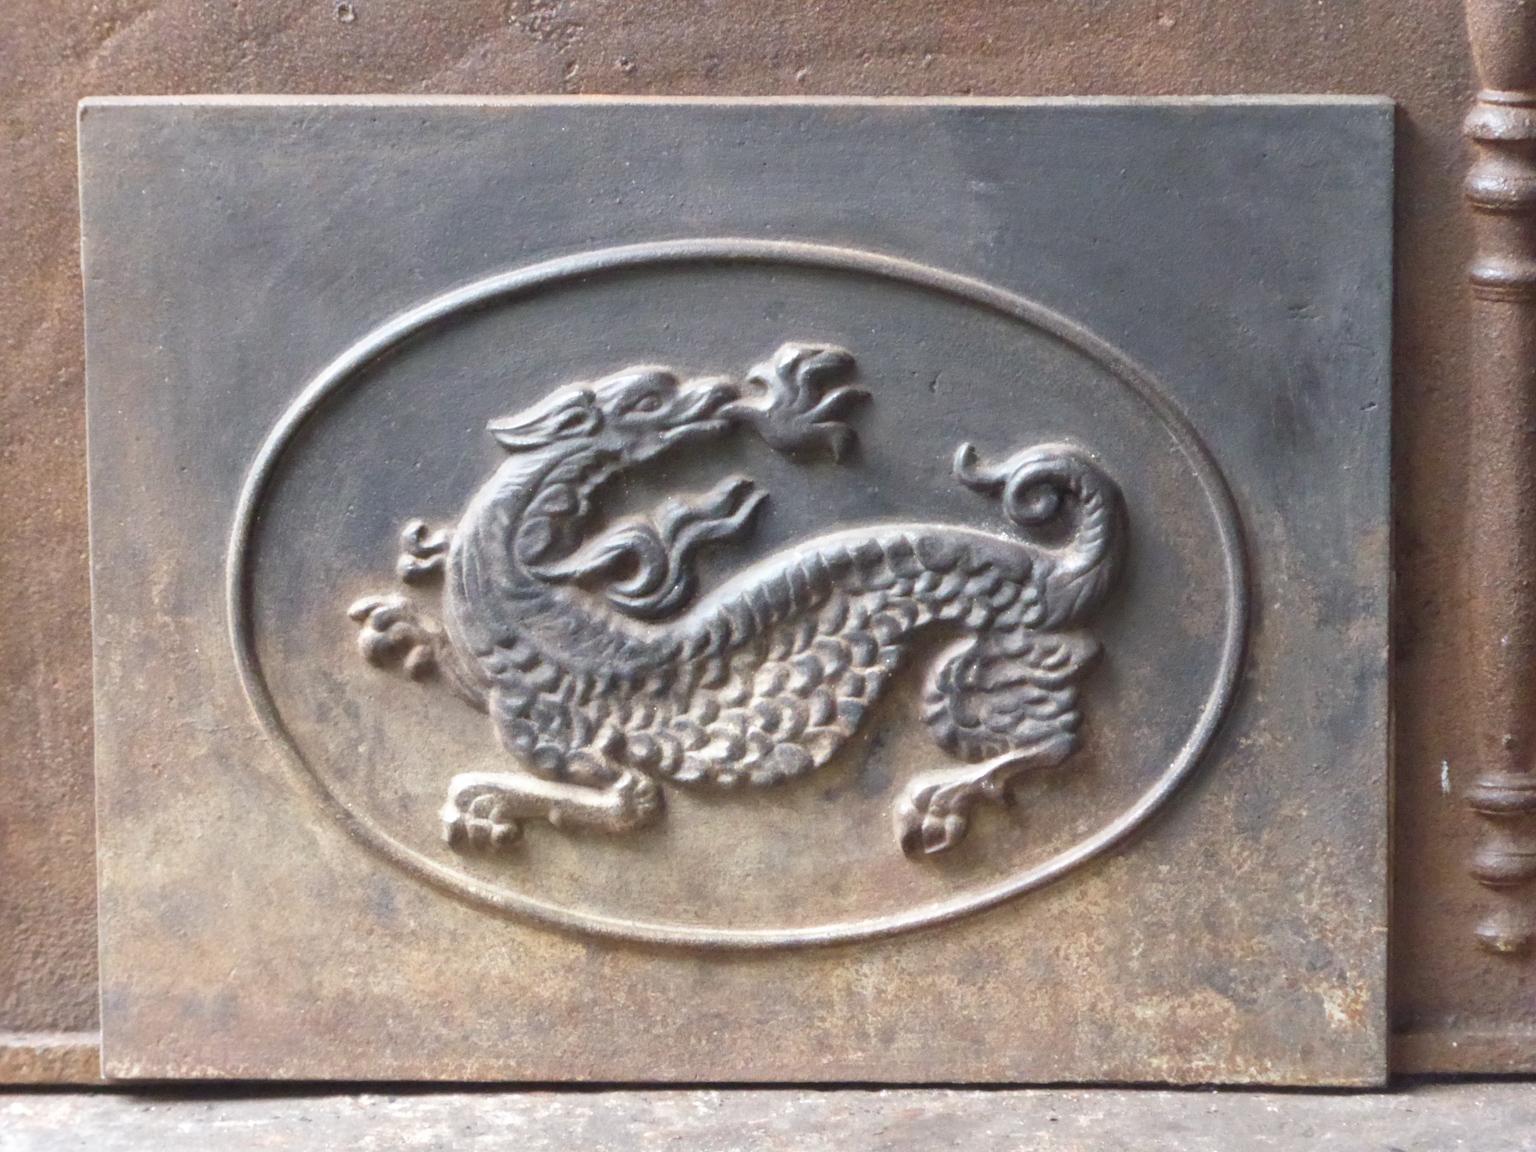 French 20th century Modernist fireplace fireback with a salamander. The salamander is symbol of François I (king of France) who reigned from 1515-1547, during the French Renaissance period.







 